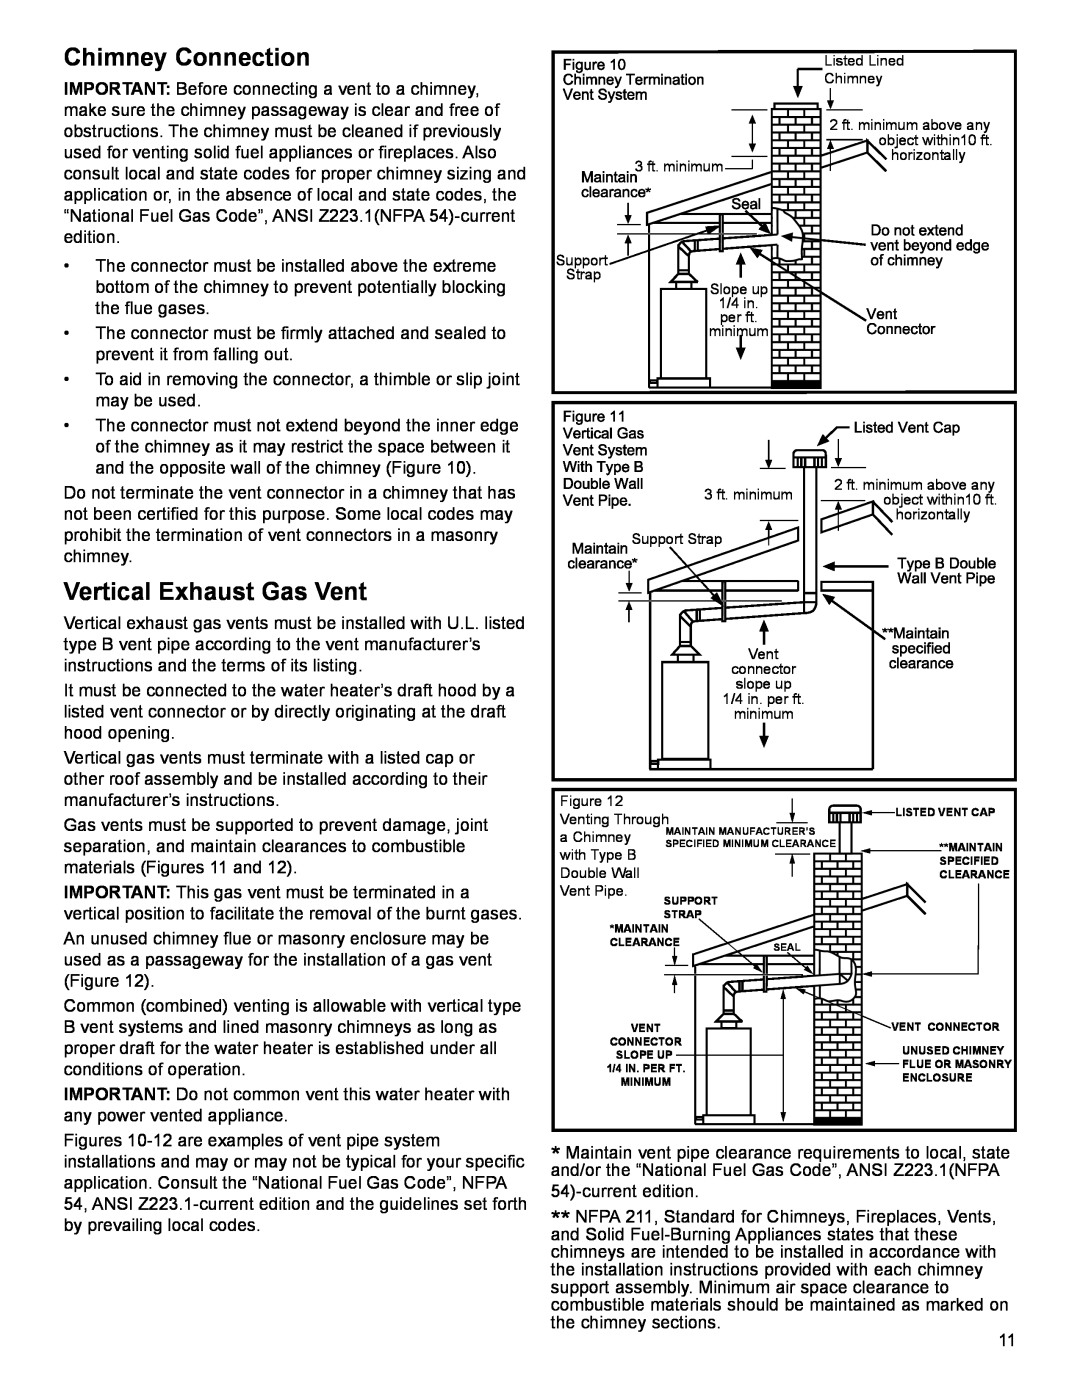 American Water Heater 318935-003 installation instructions Chimney Connection, Vertical Exhaust Gas Vent 